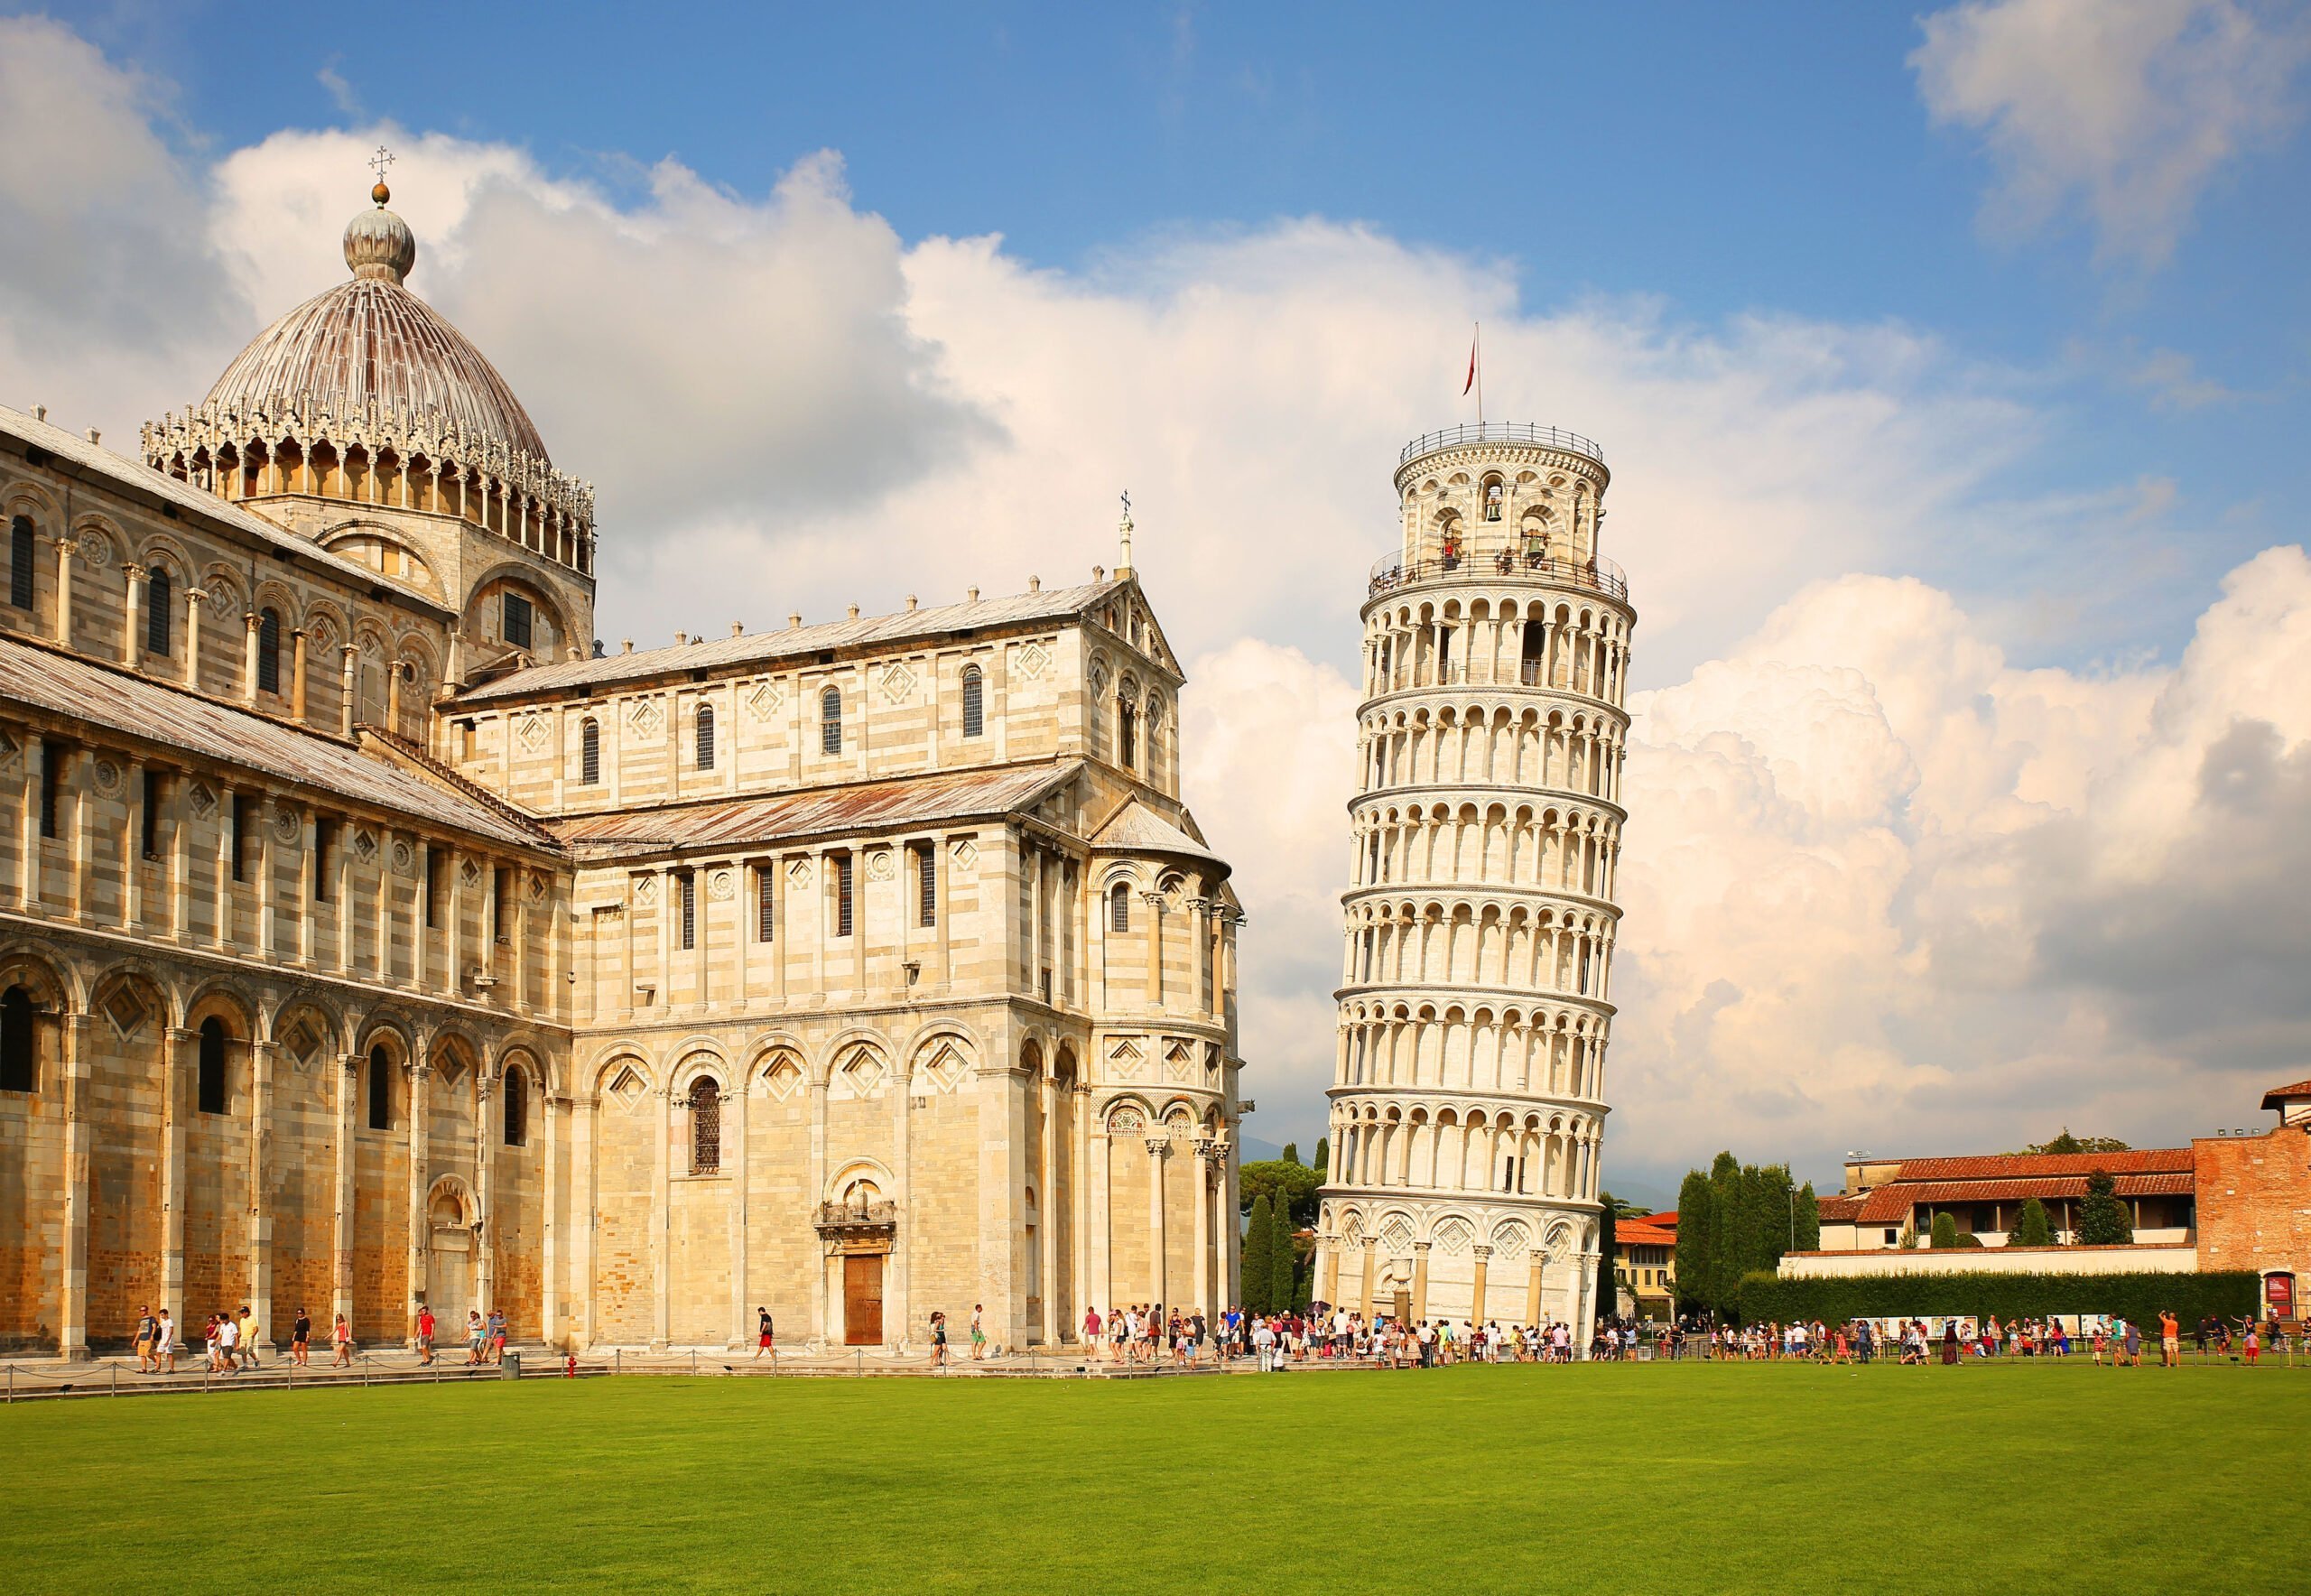 Leaning Tower Of Pisa, Italy, 5 Day Package